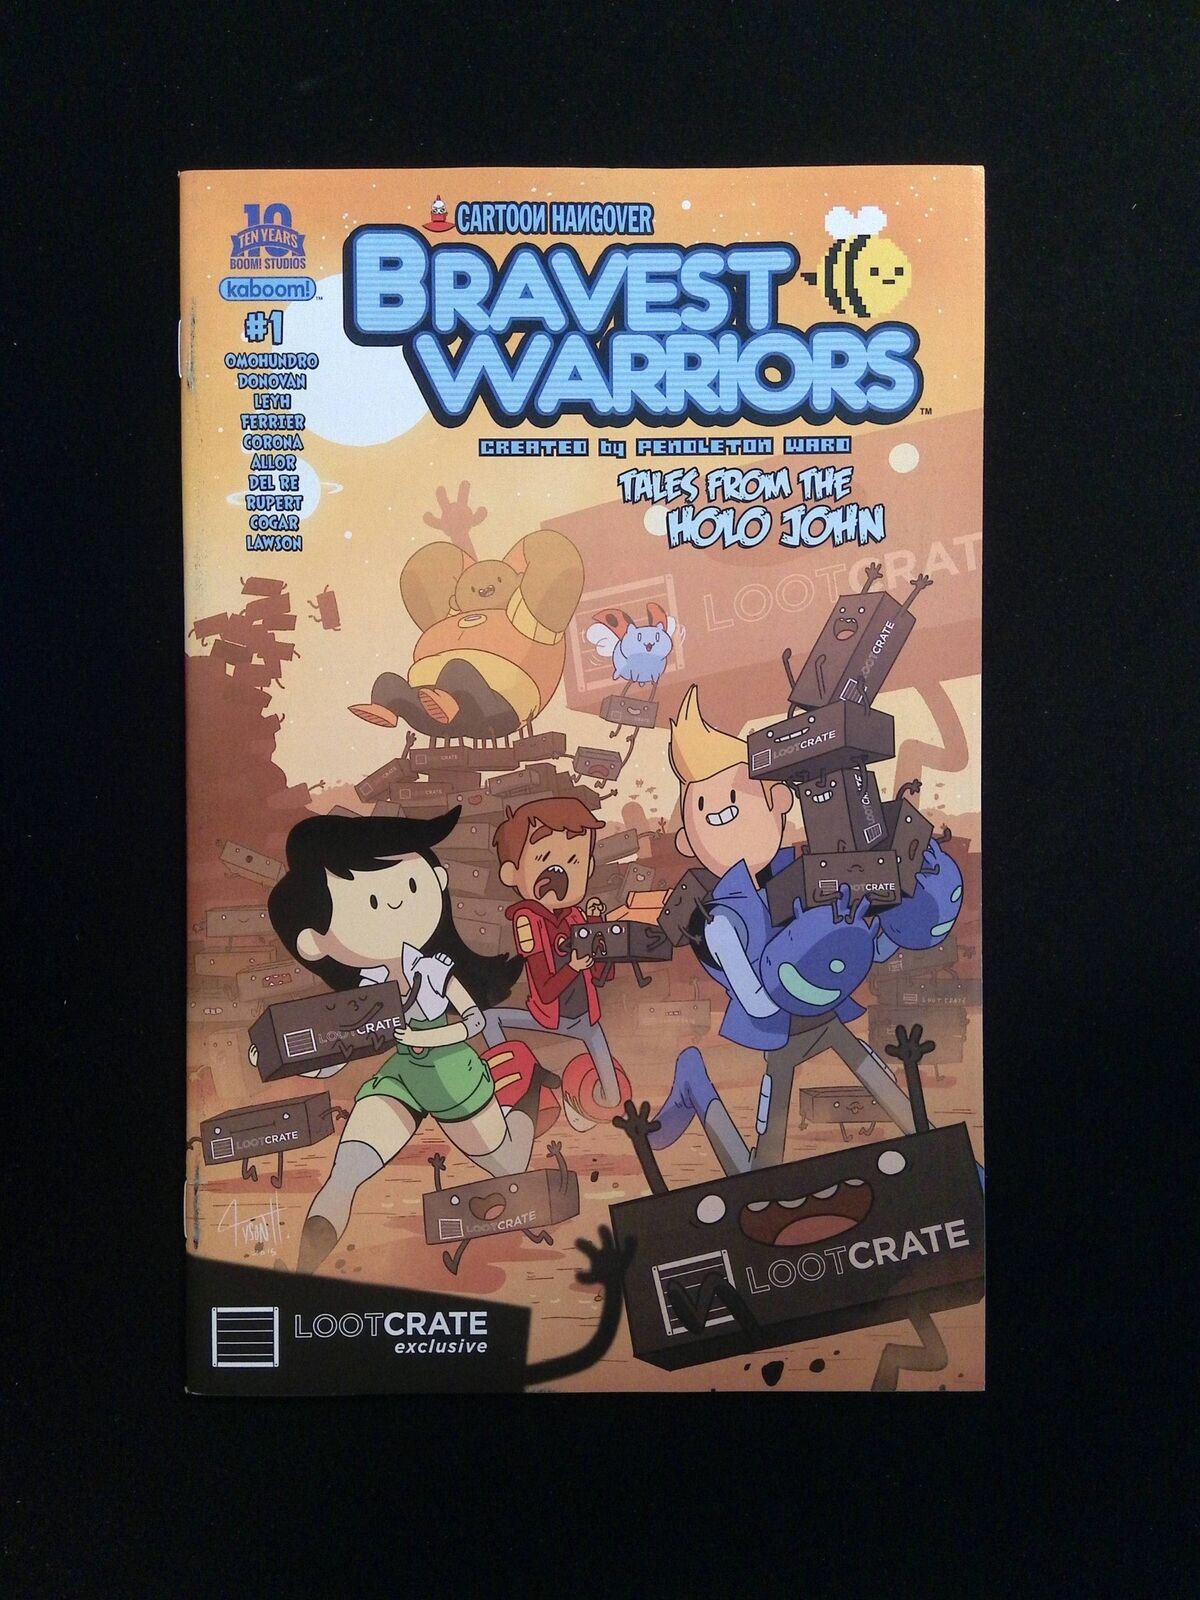 Bravest Warriors Tales  from the Holo John #1LOOTCRATE  BOOM Comics 2015 VF/NM